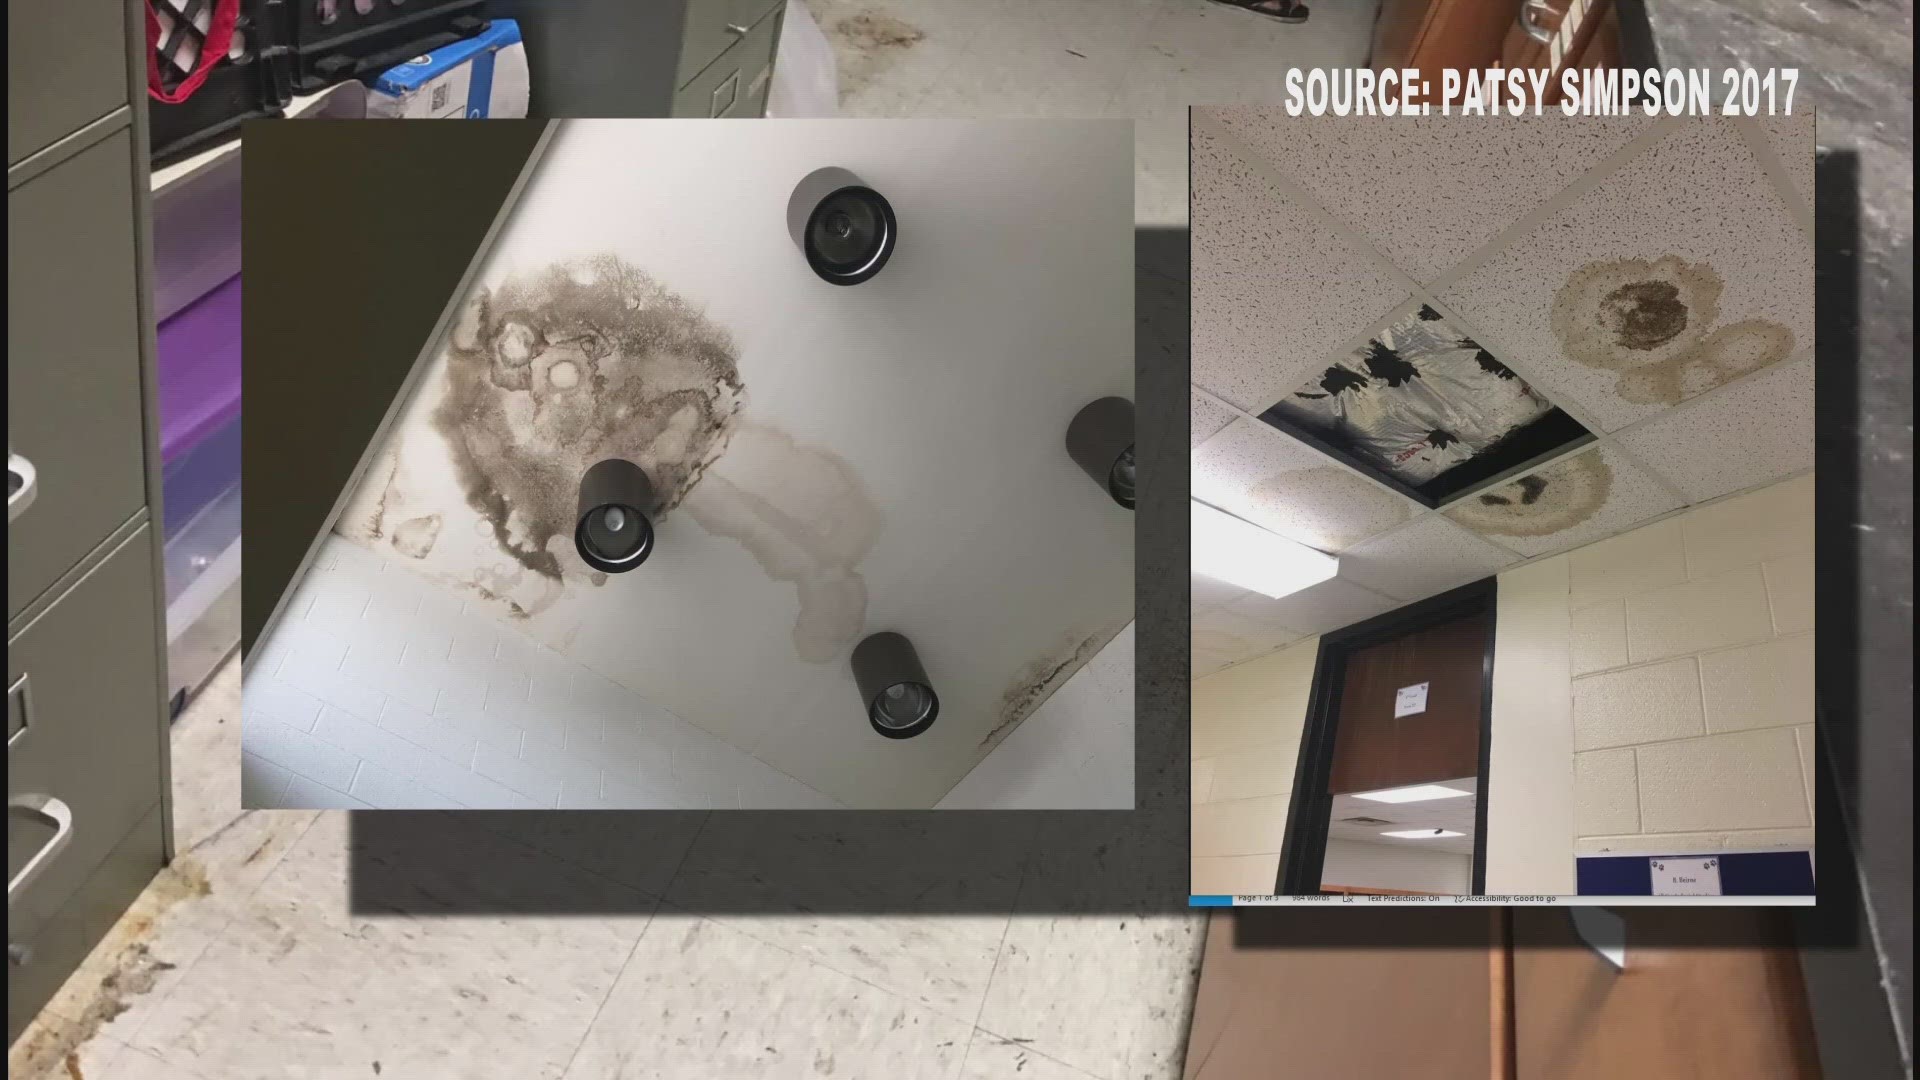 ABSS says it will start the school year a week late after mold was identified at least 12 schools.